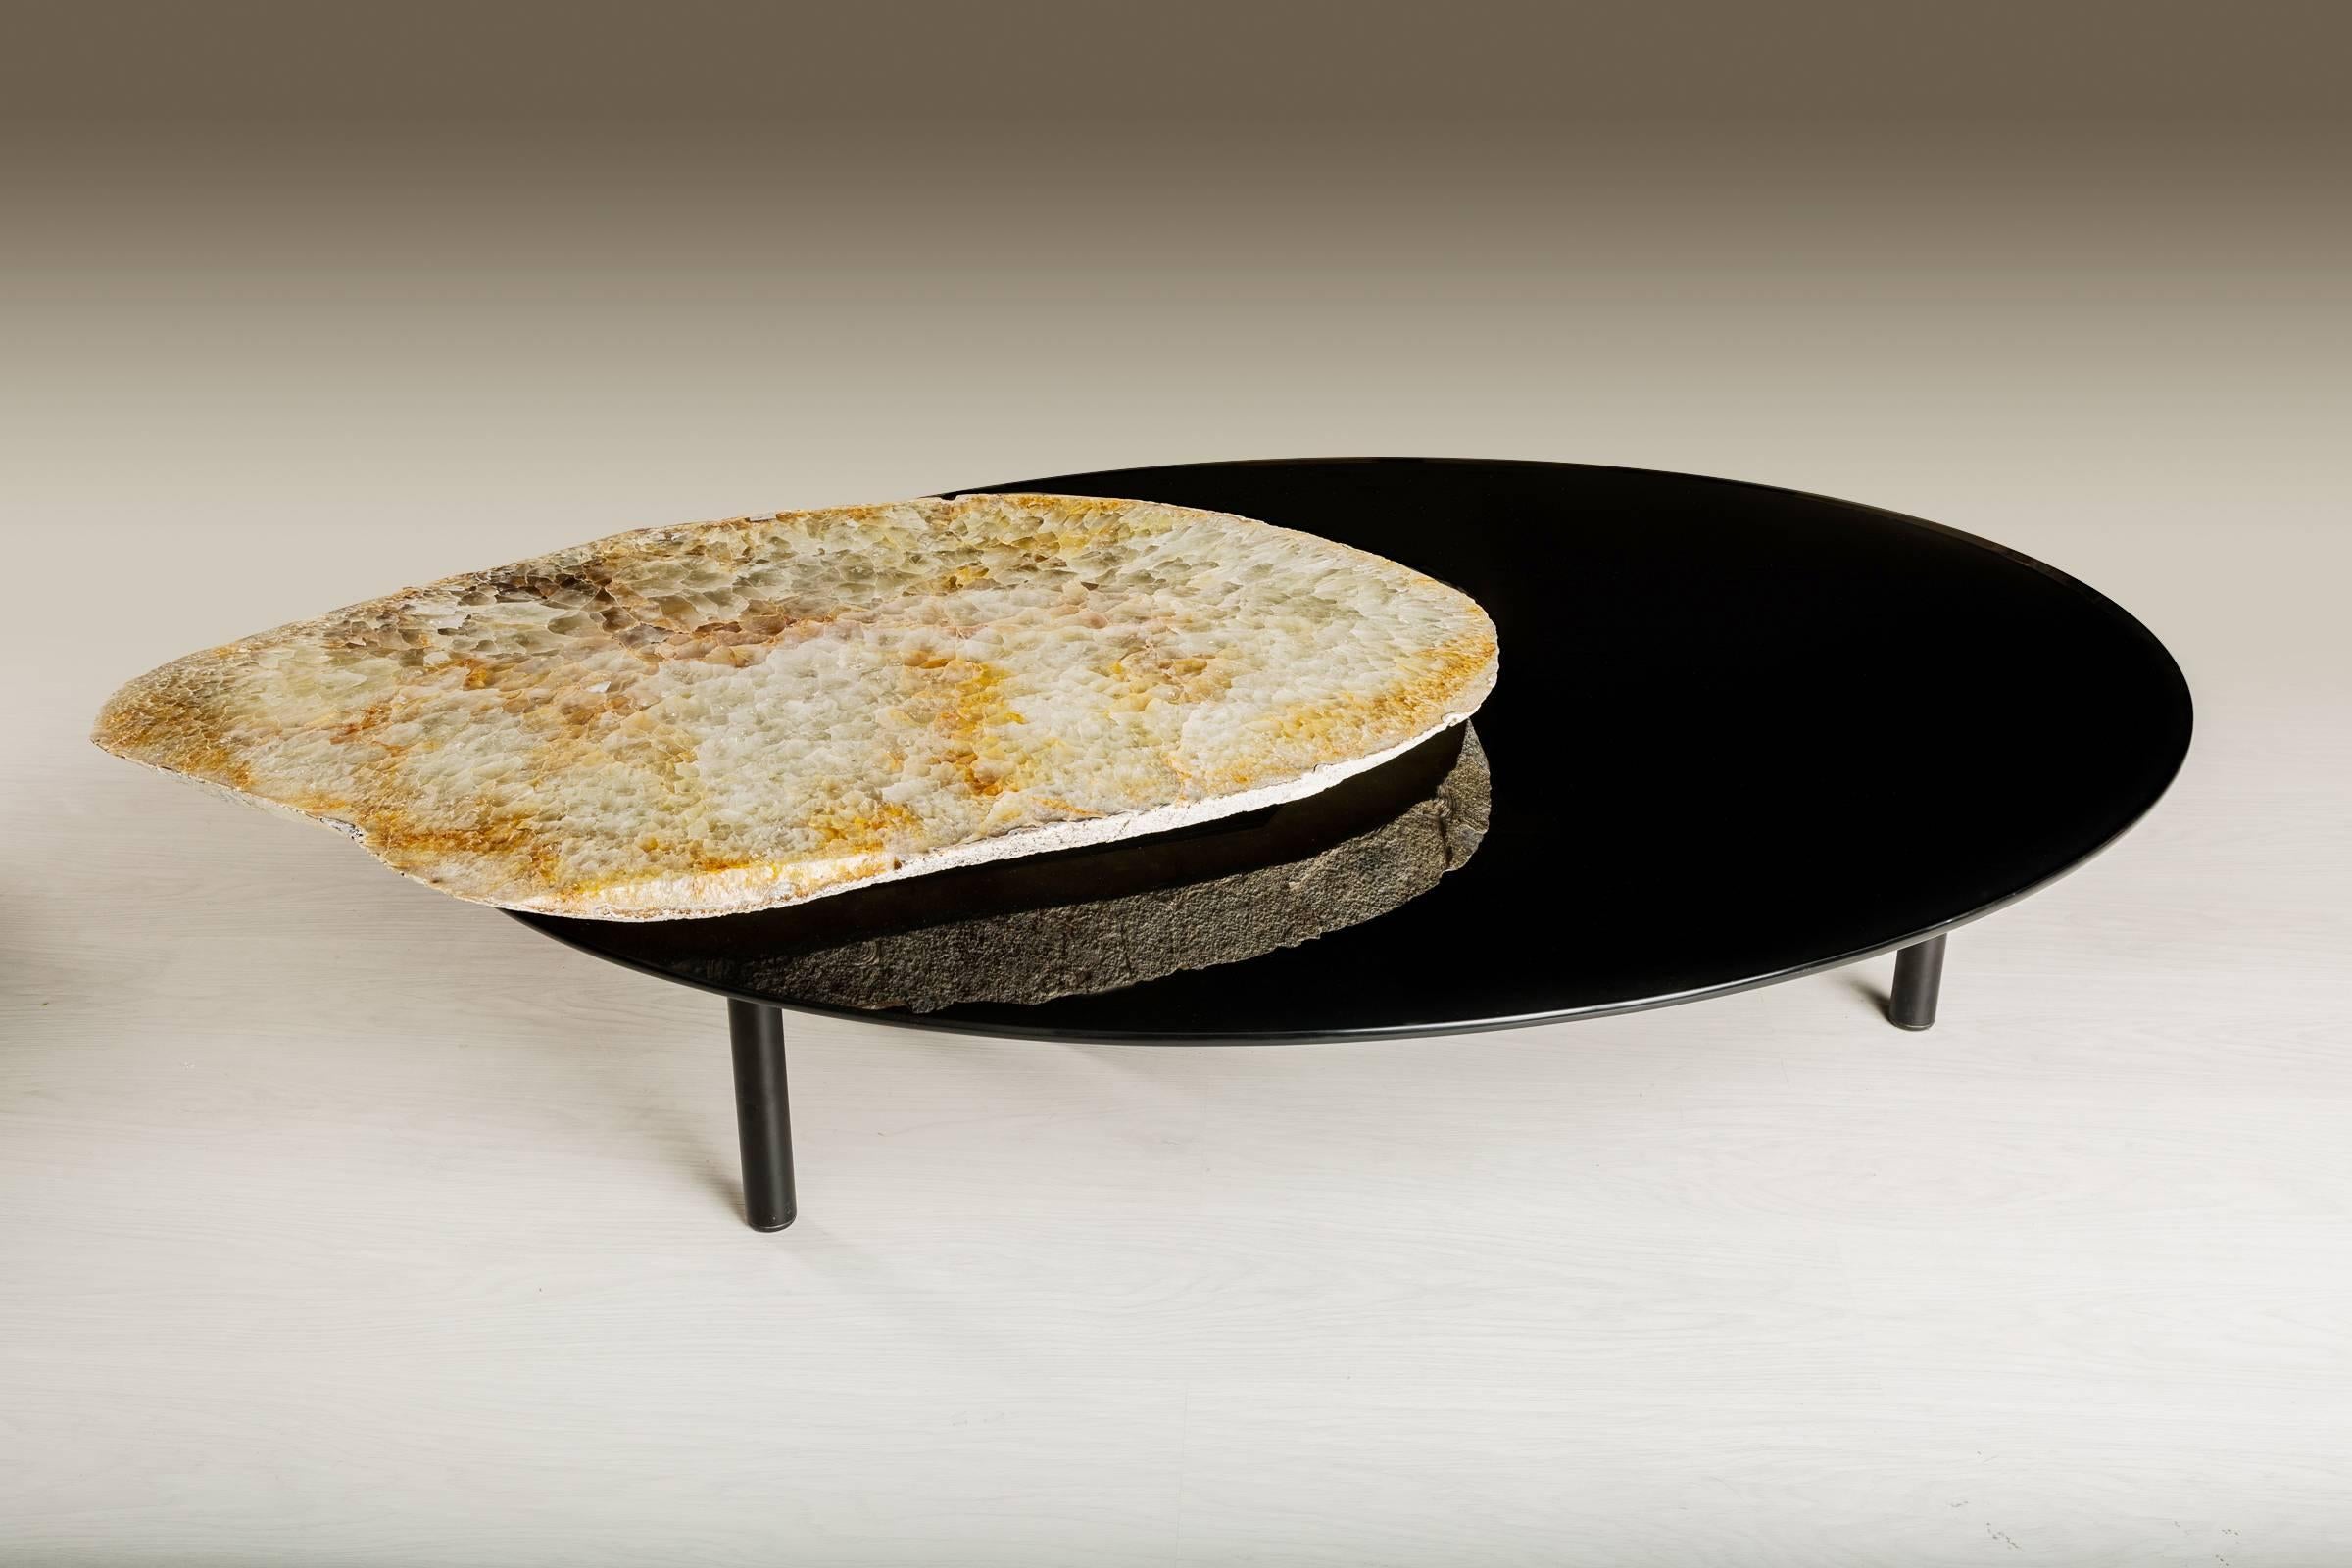 This center table is made from an agate slab from Brazil, it has a combination of colors between white, beige and brownish circumference.
Agates are formed in rounded nodules, which are sliced open to bring out the internal pattern hidden in the